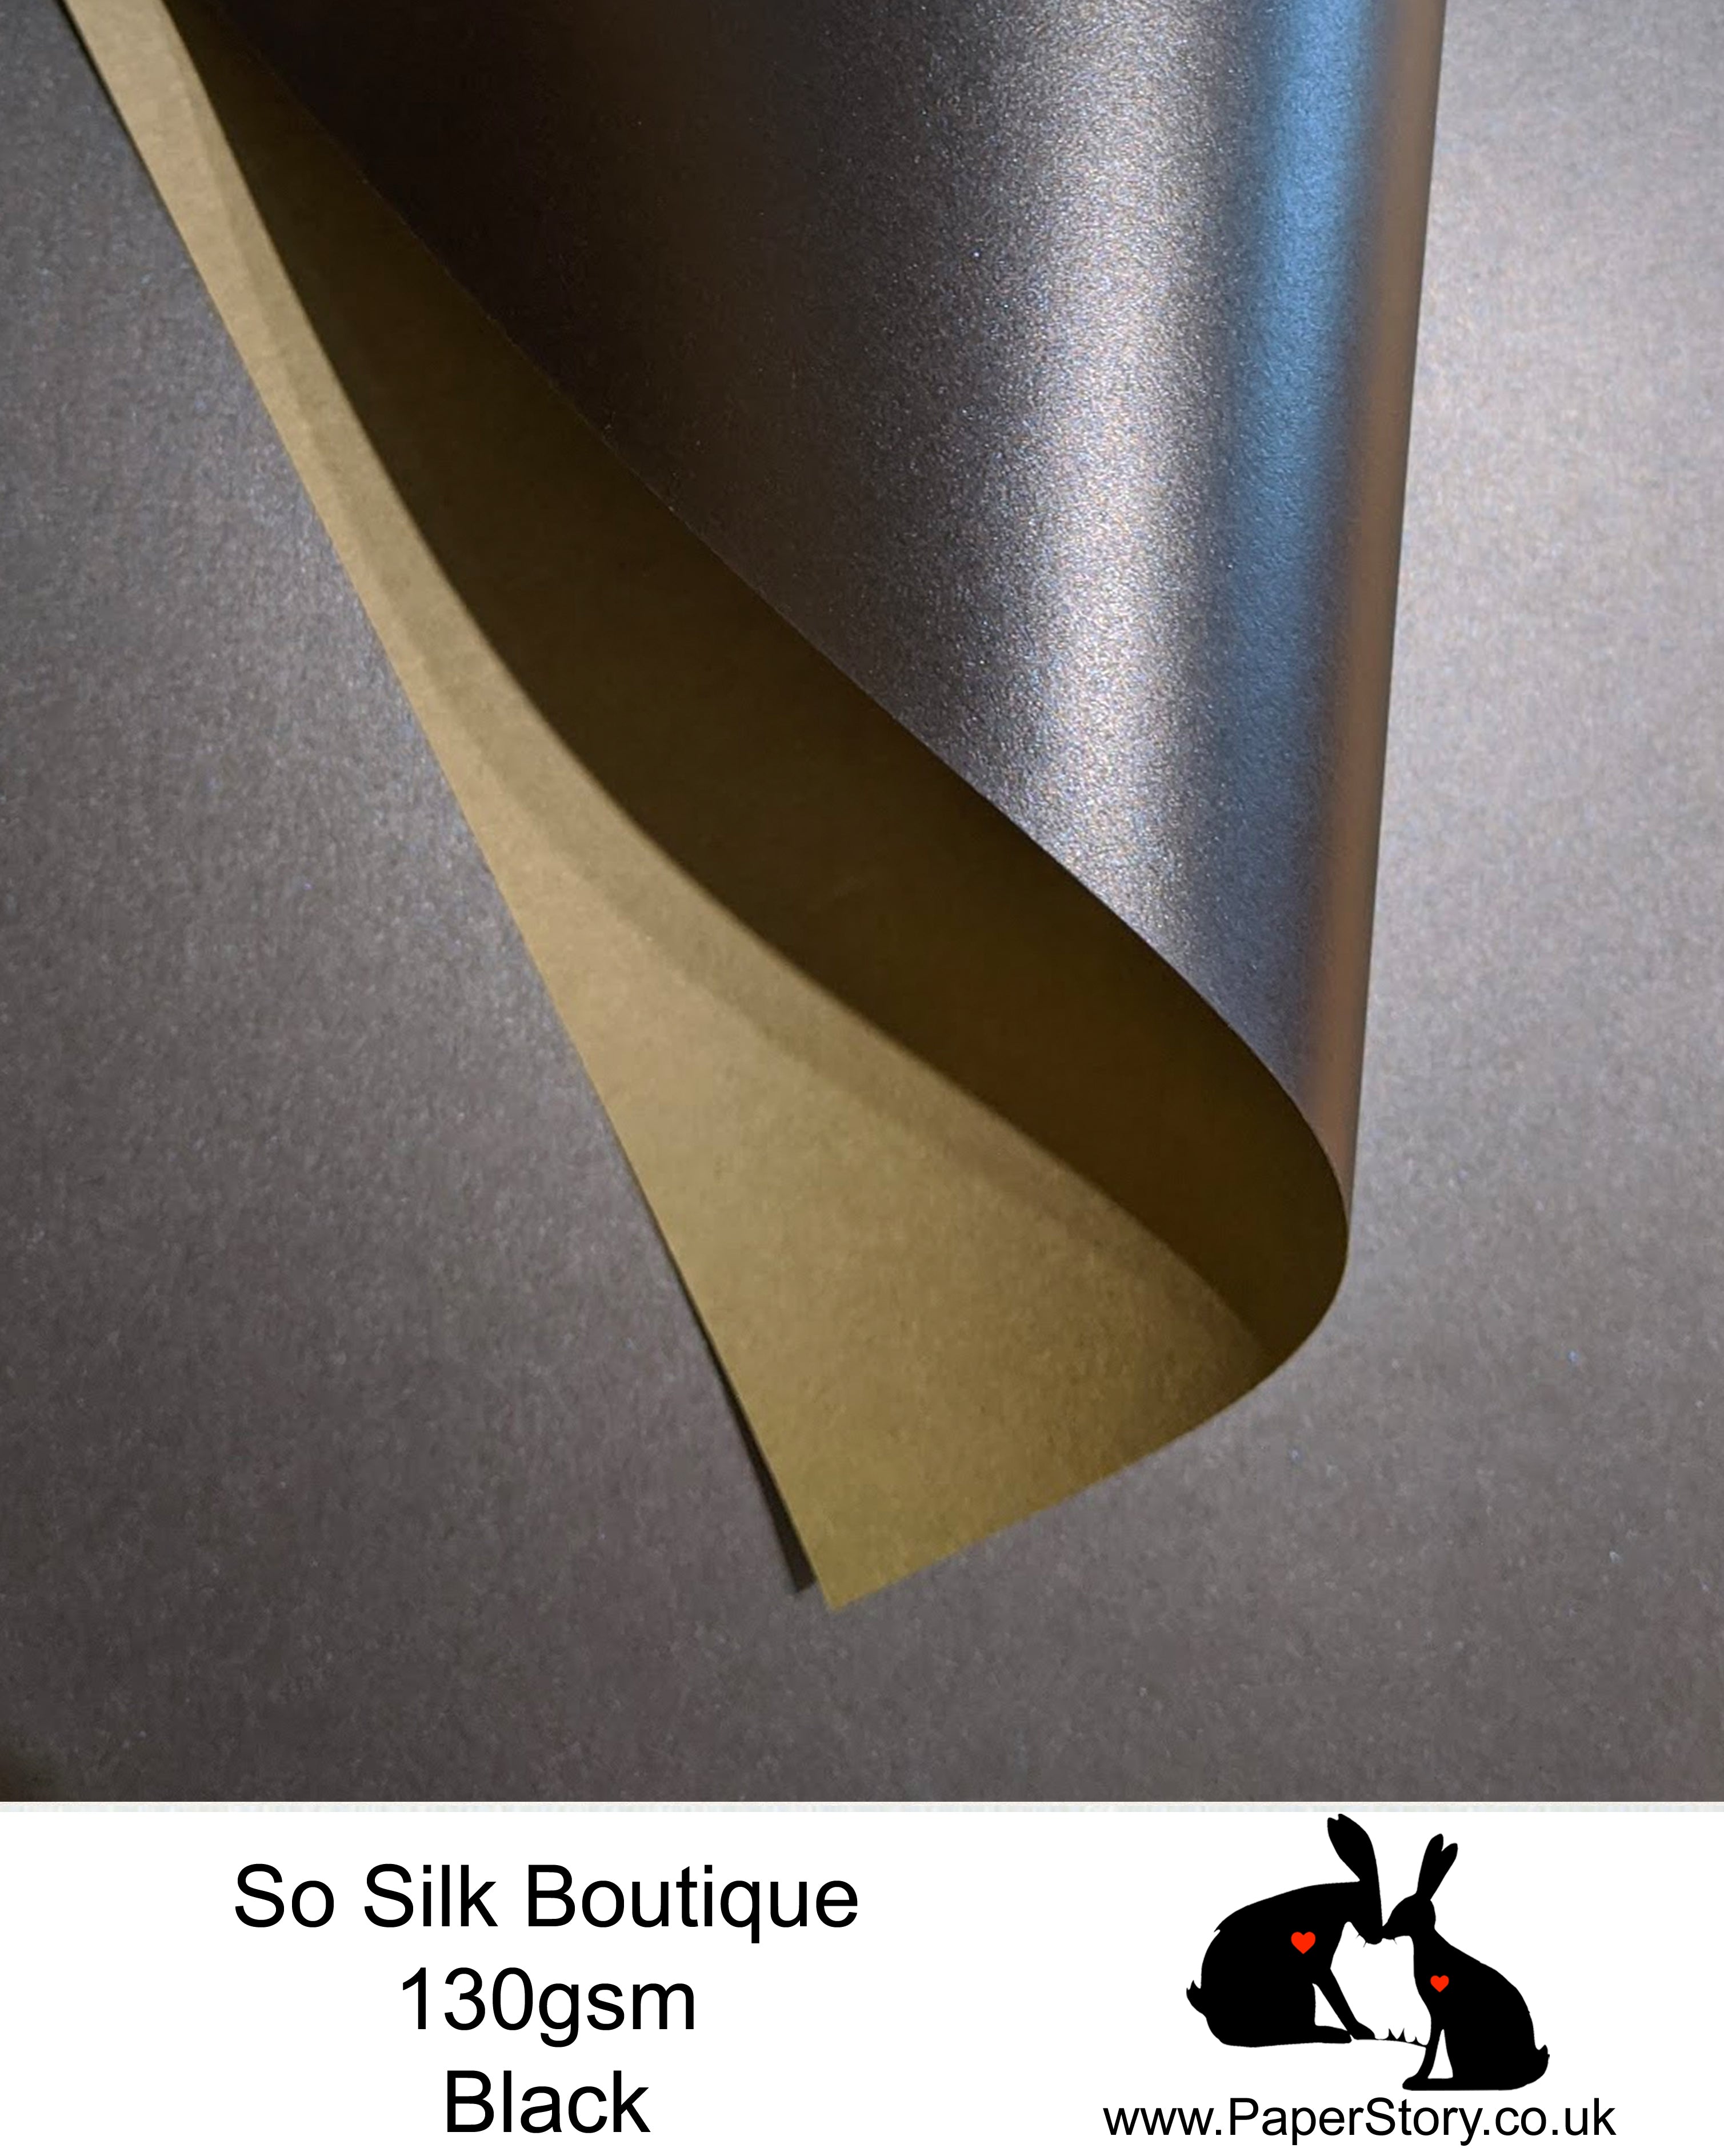 So Silk Boutique 130 gsm. Silky soft Papercutting and craft paper. With a Shimmering Pearlescent finish made with silk fibres, this is a perfect papercutting paper for beginners to experts. T